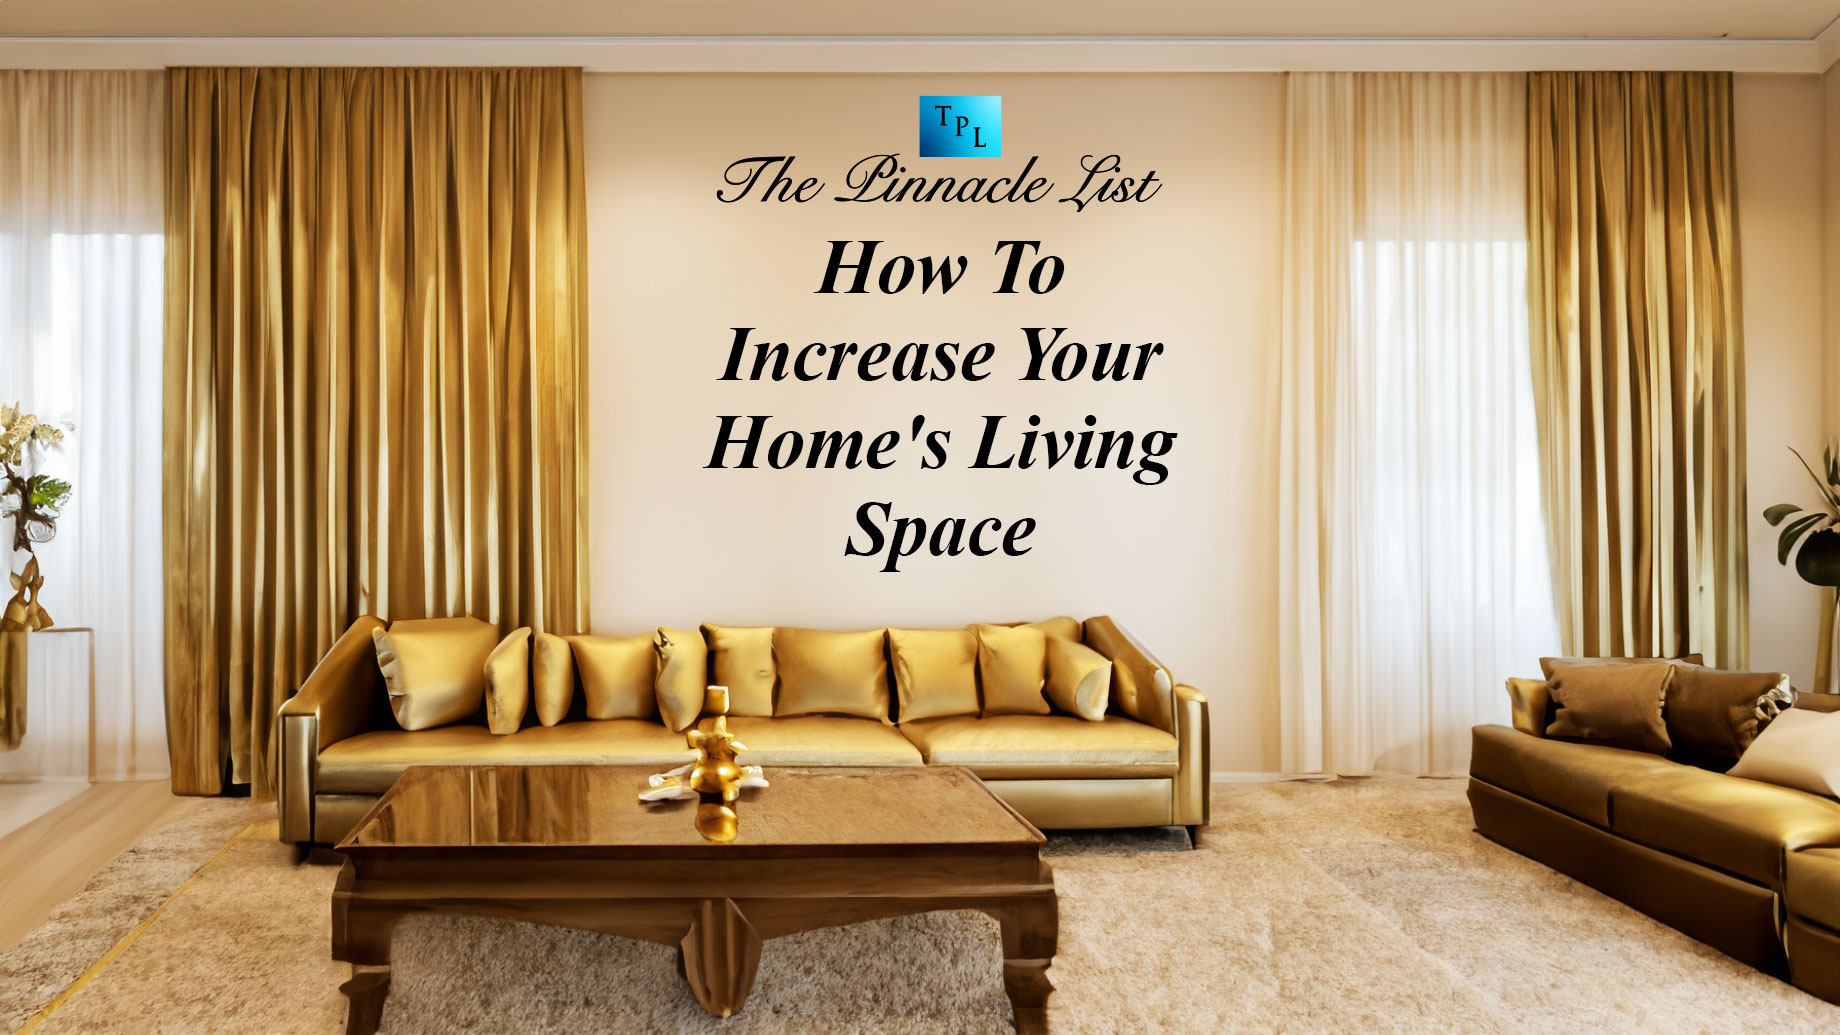 How To Increase Your Home's Living Space